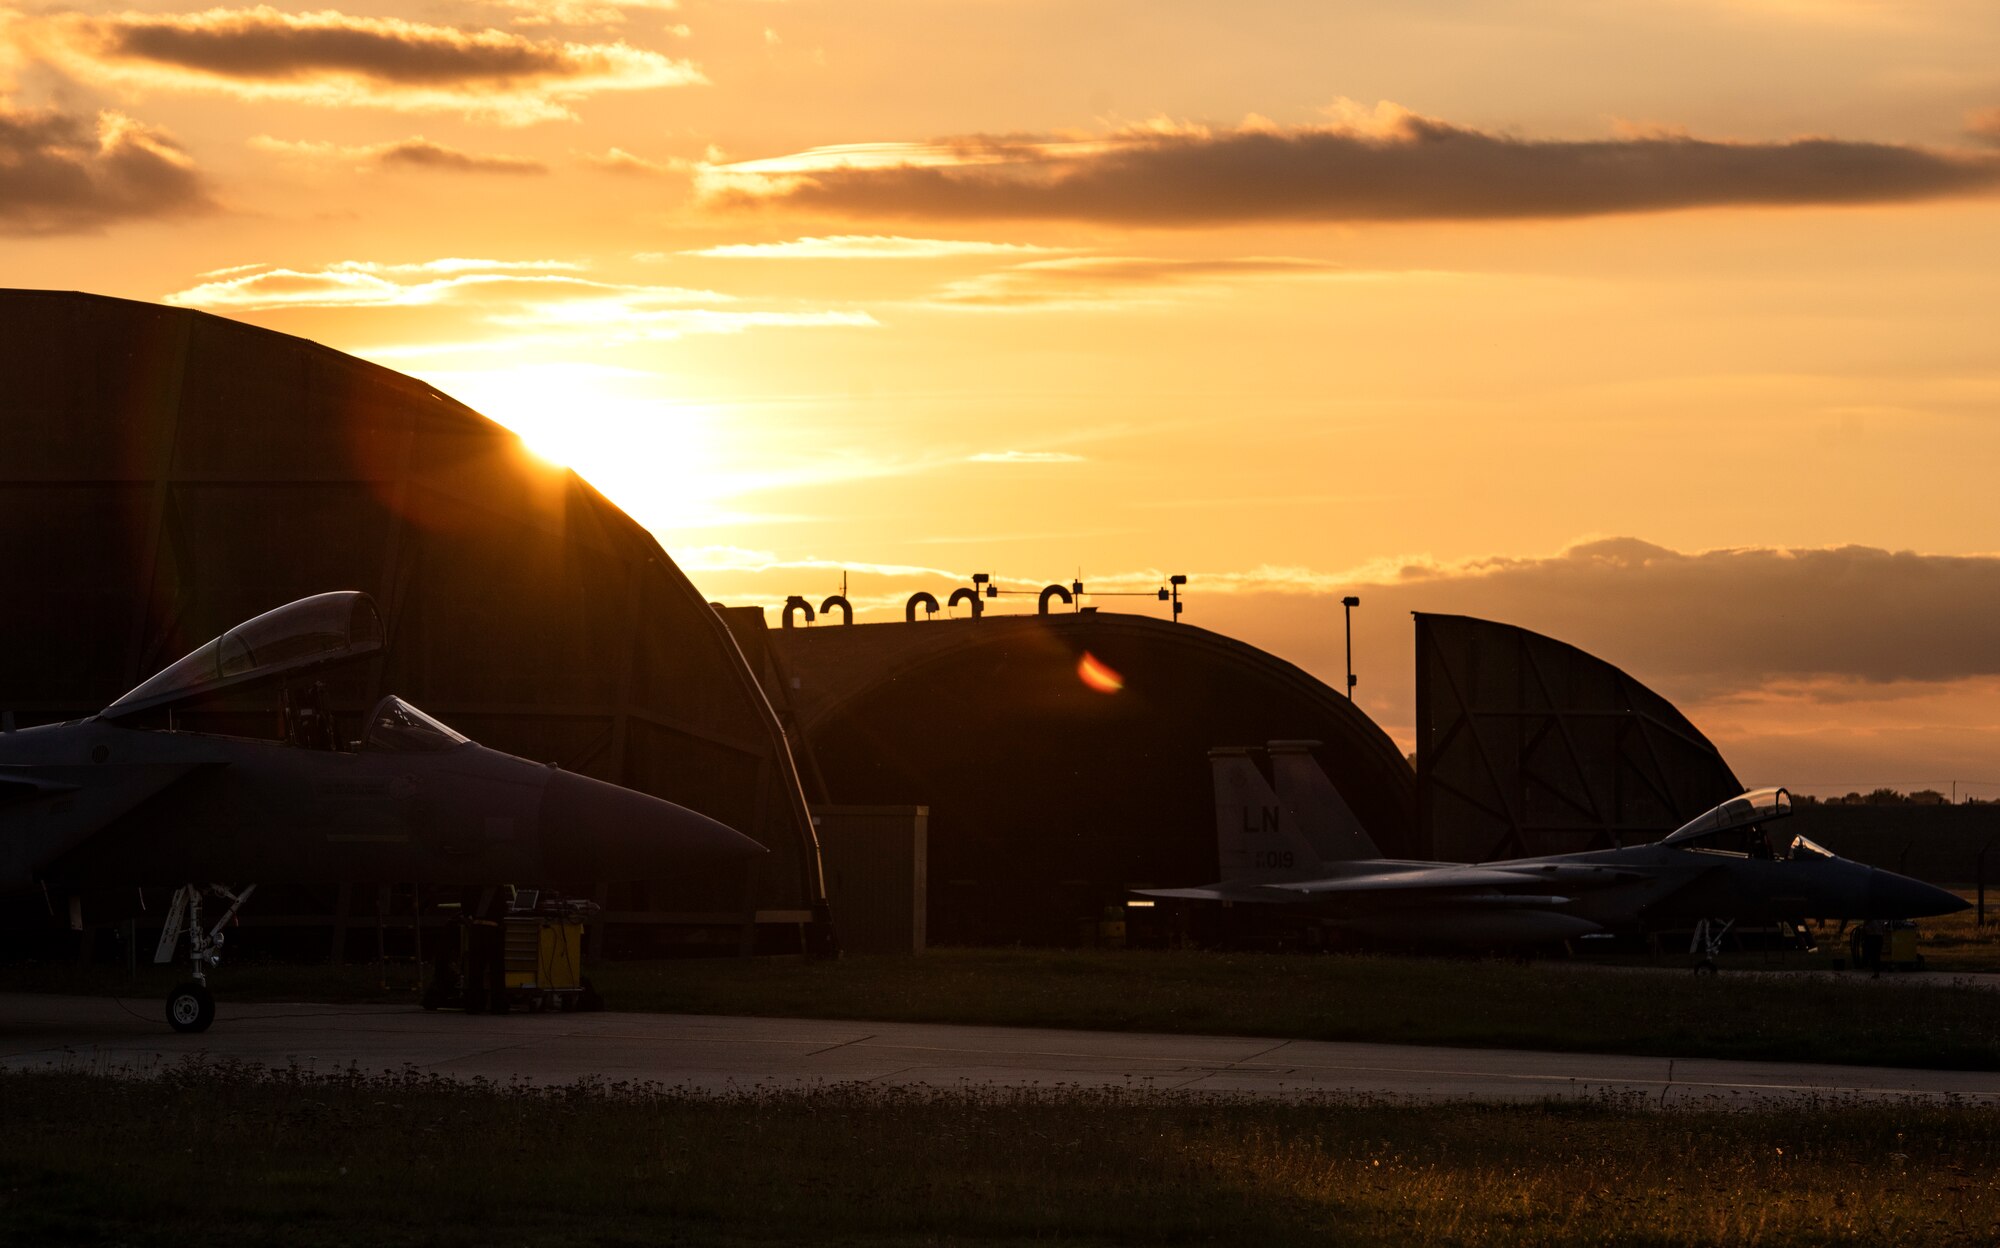 Two F-15C Eagles, assigned to the 493rd Fighter Squadron, are parked on the flightline prior to evening take-offs at Royal Air Force Lakenheath, England, Sept. 8, 2020. Night Flying Exercises provide 48th Fighter Wing aircrew and support personnel the experience needed to maintain a ready force capable of ensuring the collective defence of the NATO alliance. (U.S. Air Force photo by Airman 1st Class Jessi Monte)